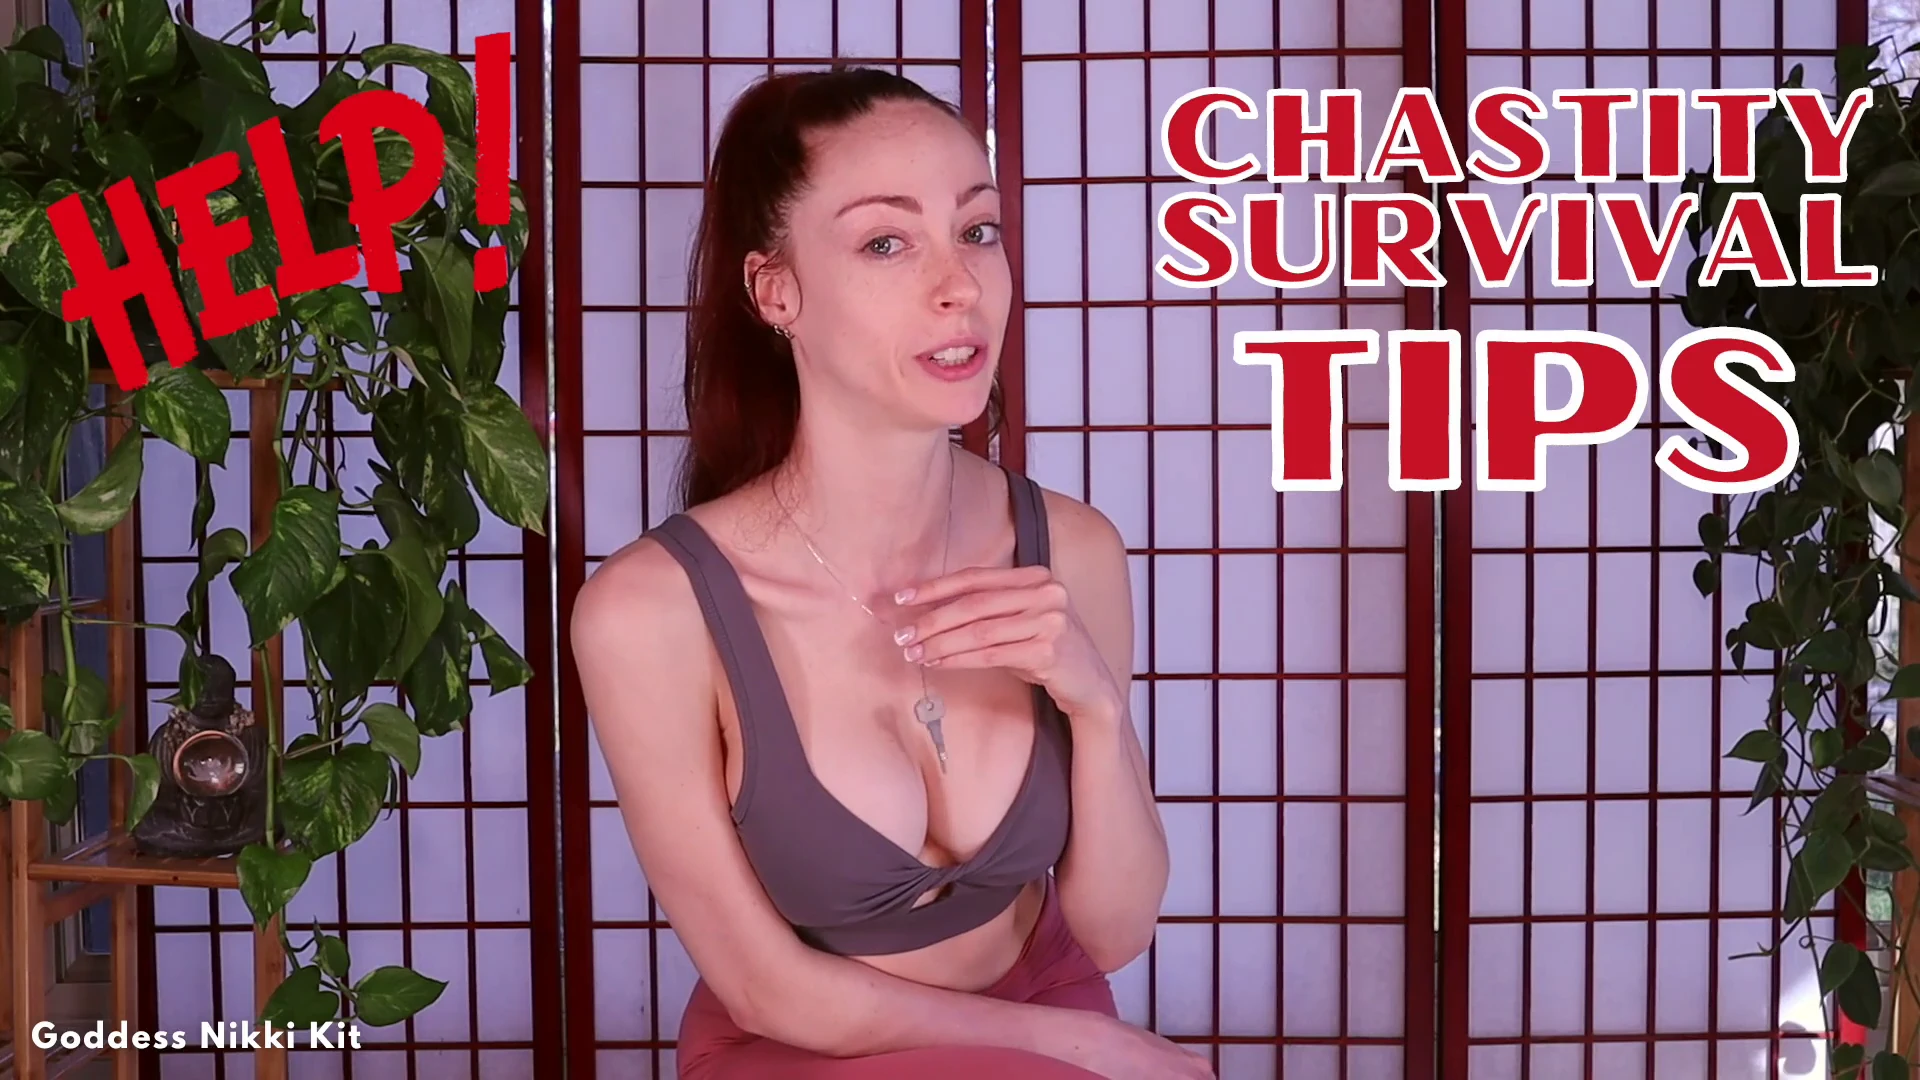 Chastity Survival Tips NEW CLIP Available on iWantChastityTraining.com